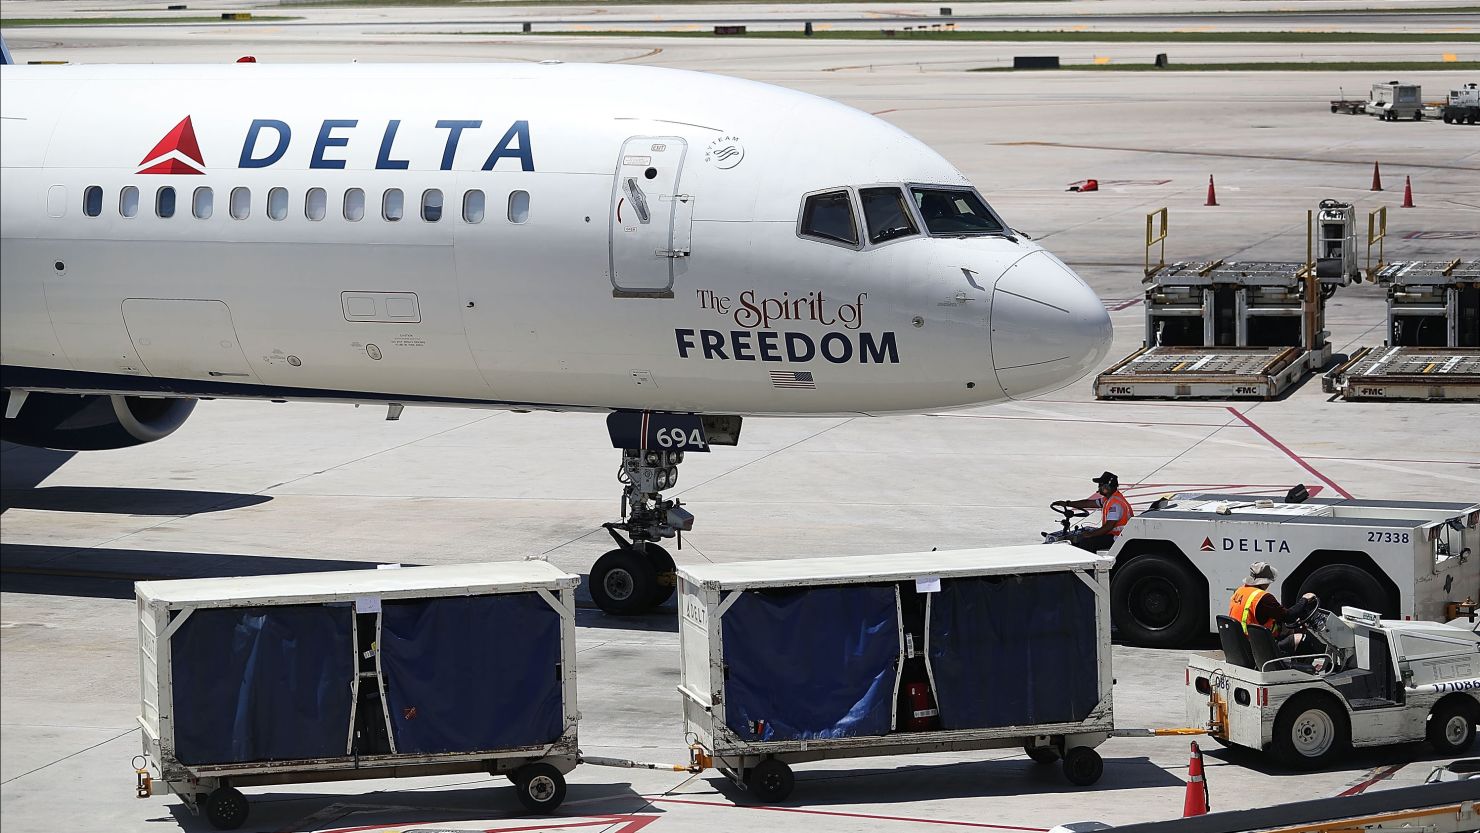 Delta Air Lines says it will carry naloxone, a medication that reverses an overdose after the fact, in its onboard medical kits.